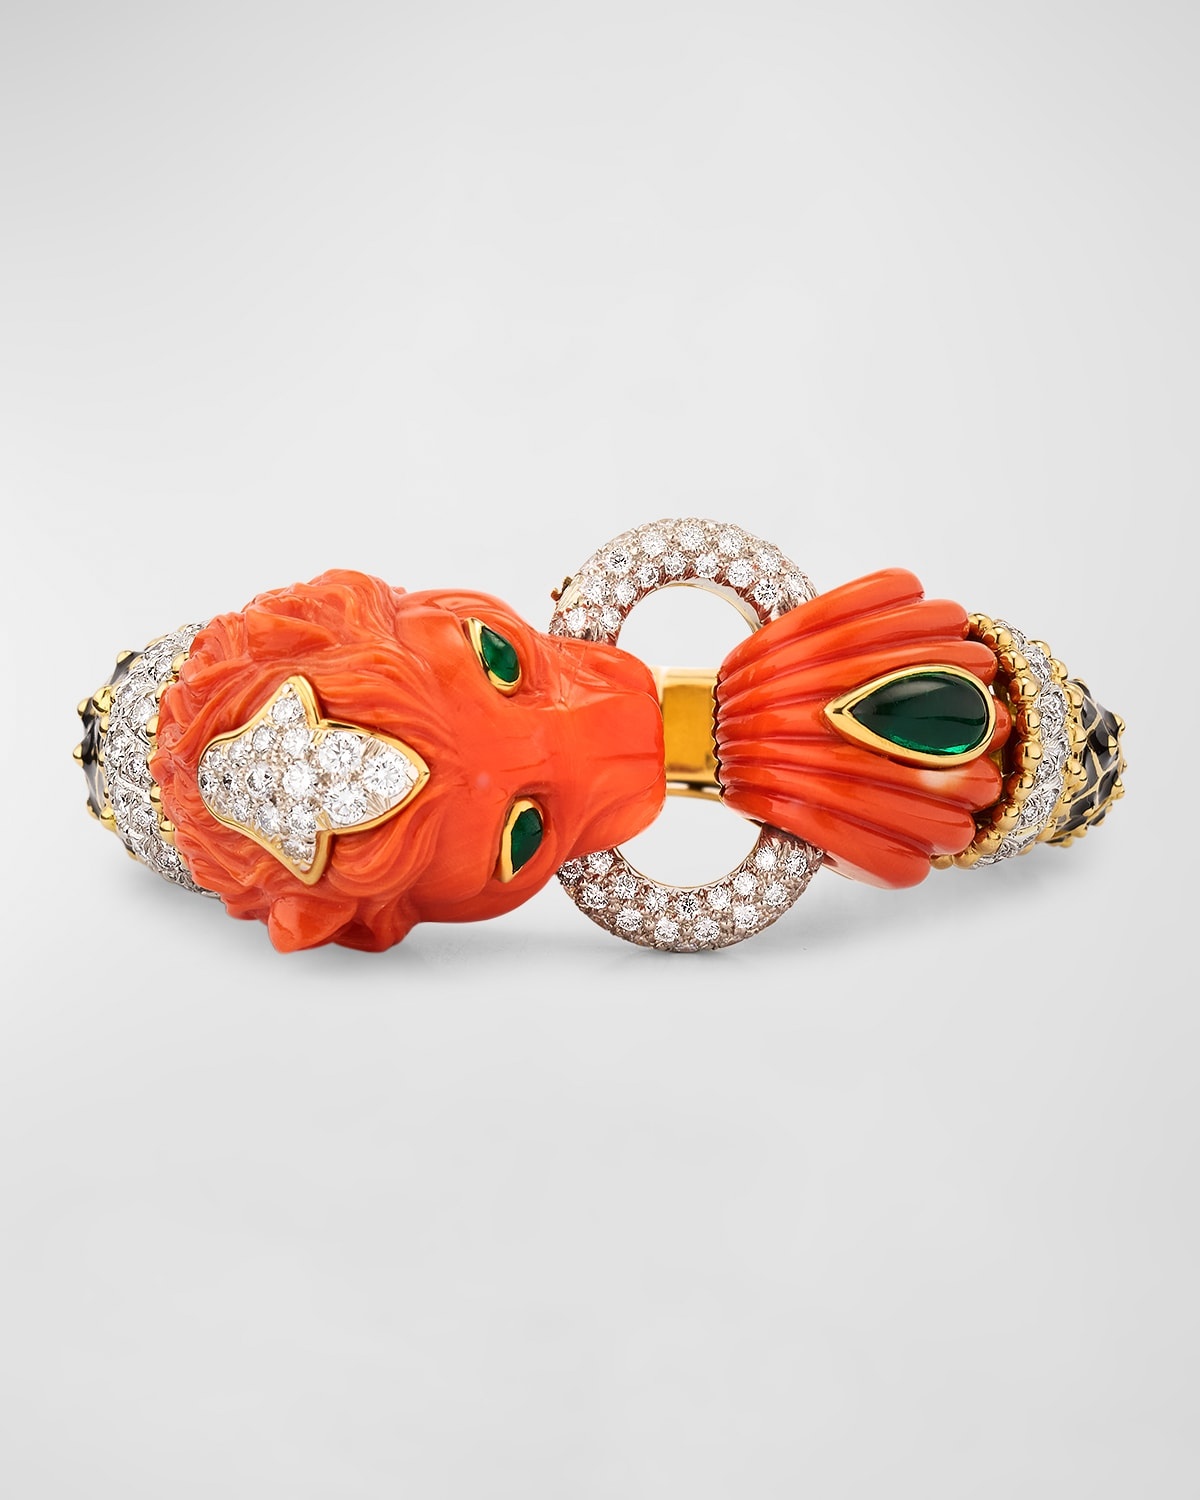 18K Yellow Gold and Platinum Lion Bracelet with Coral, Emerald and Diamonds - 6